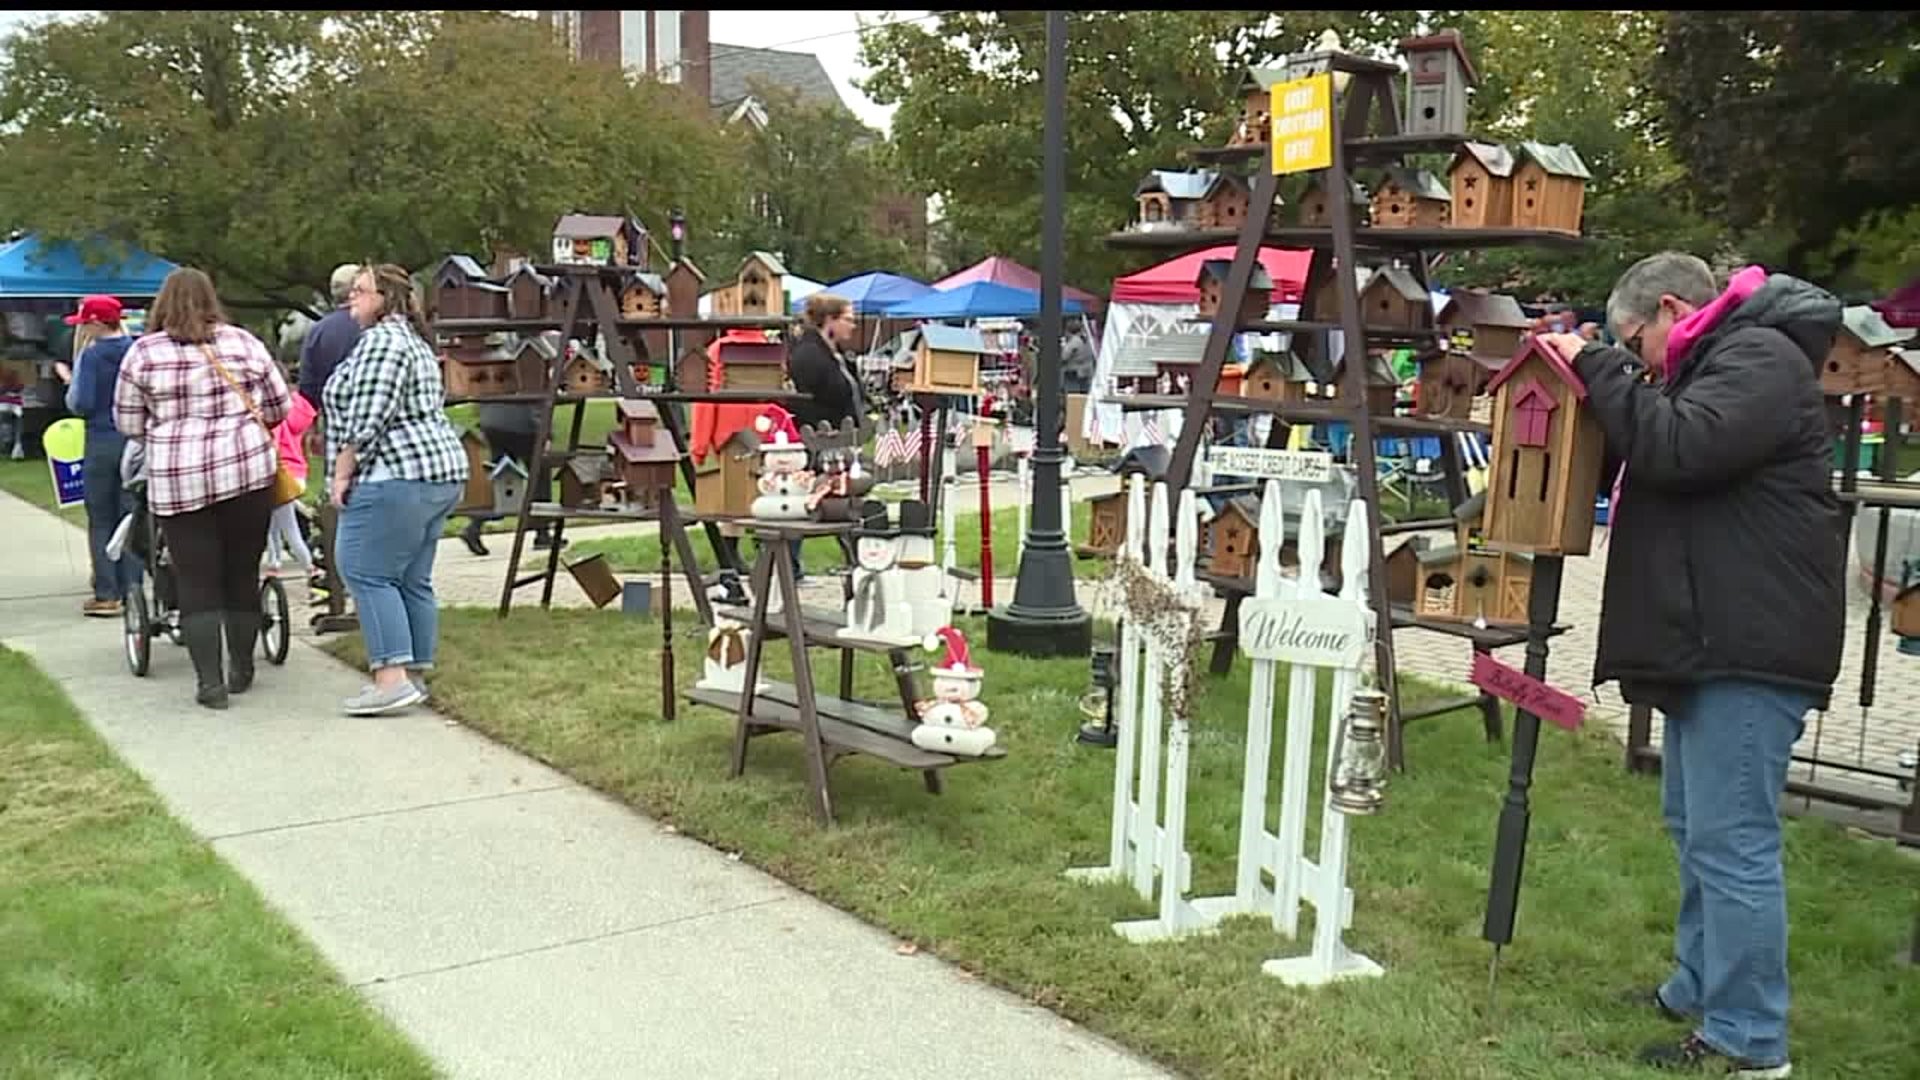 12th Annual "Harvest Day Festival & Parade" held in New Oxford